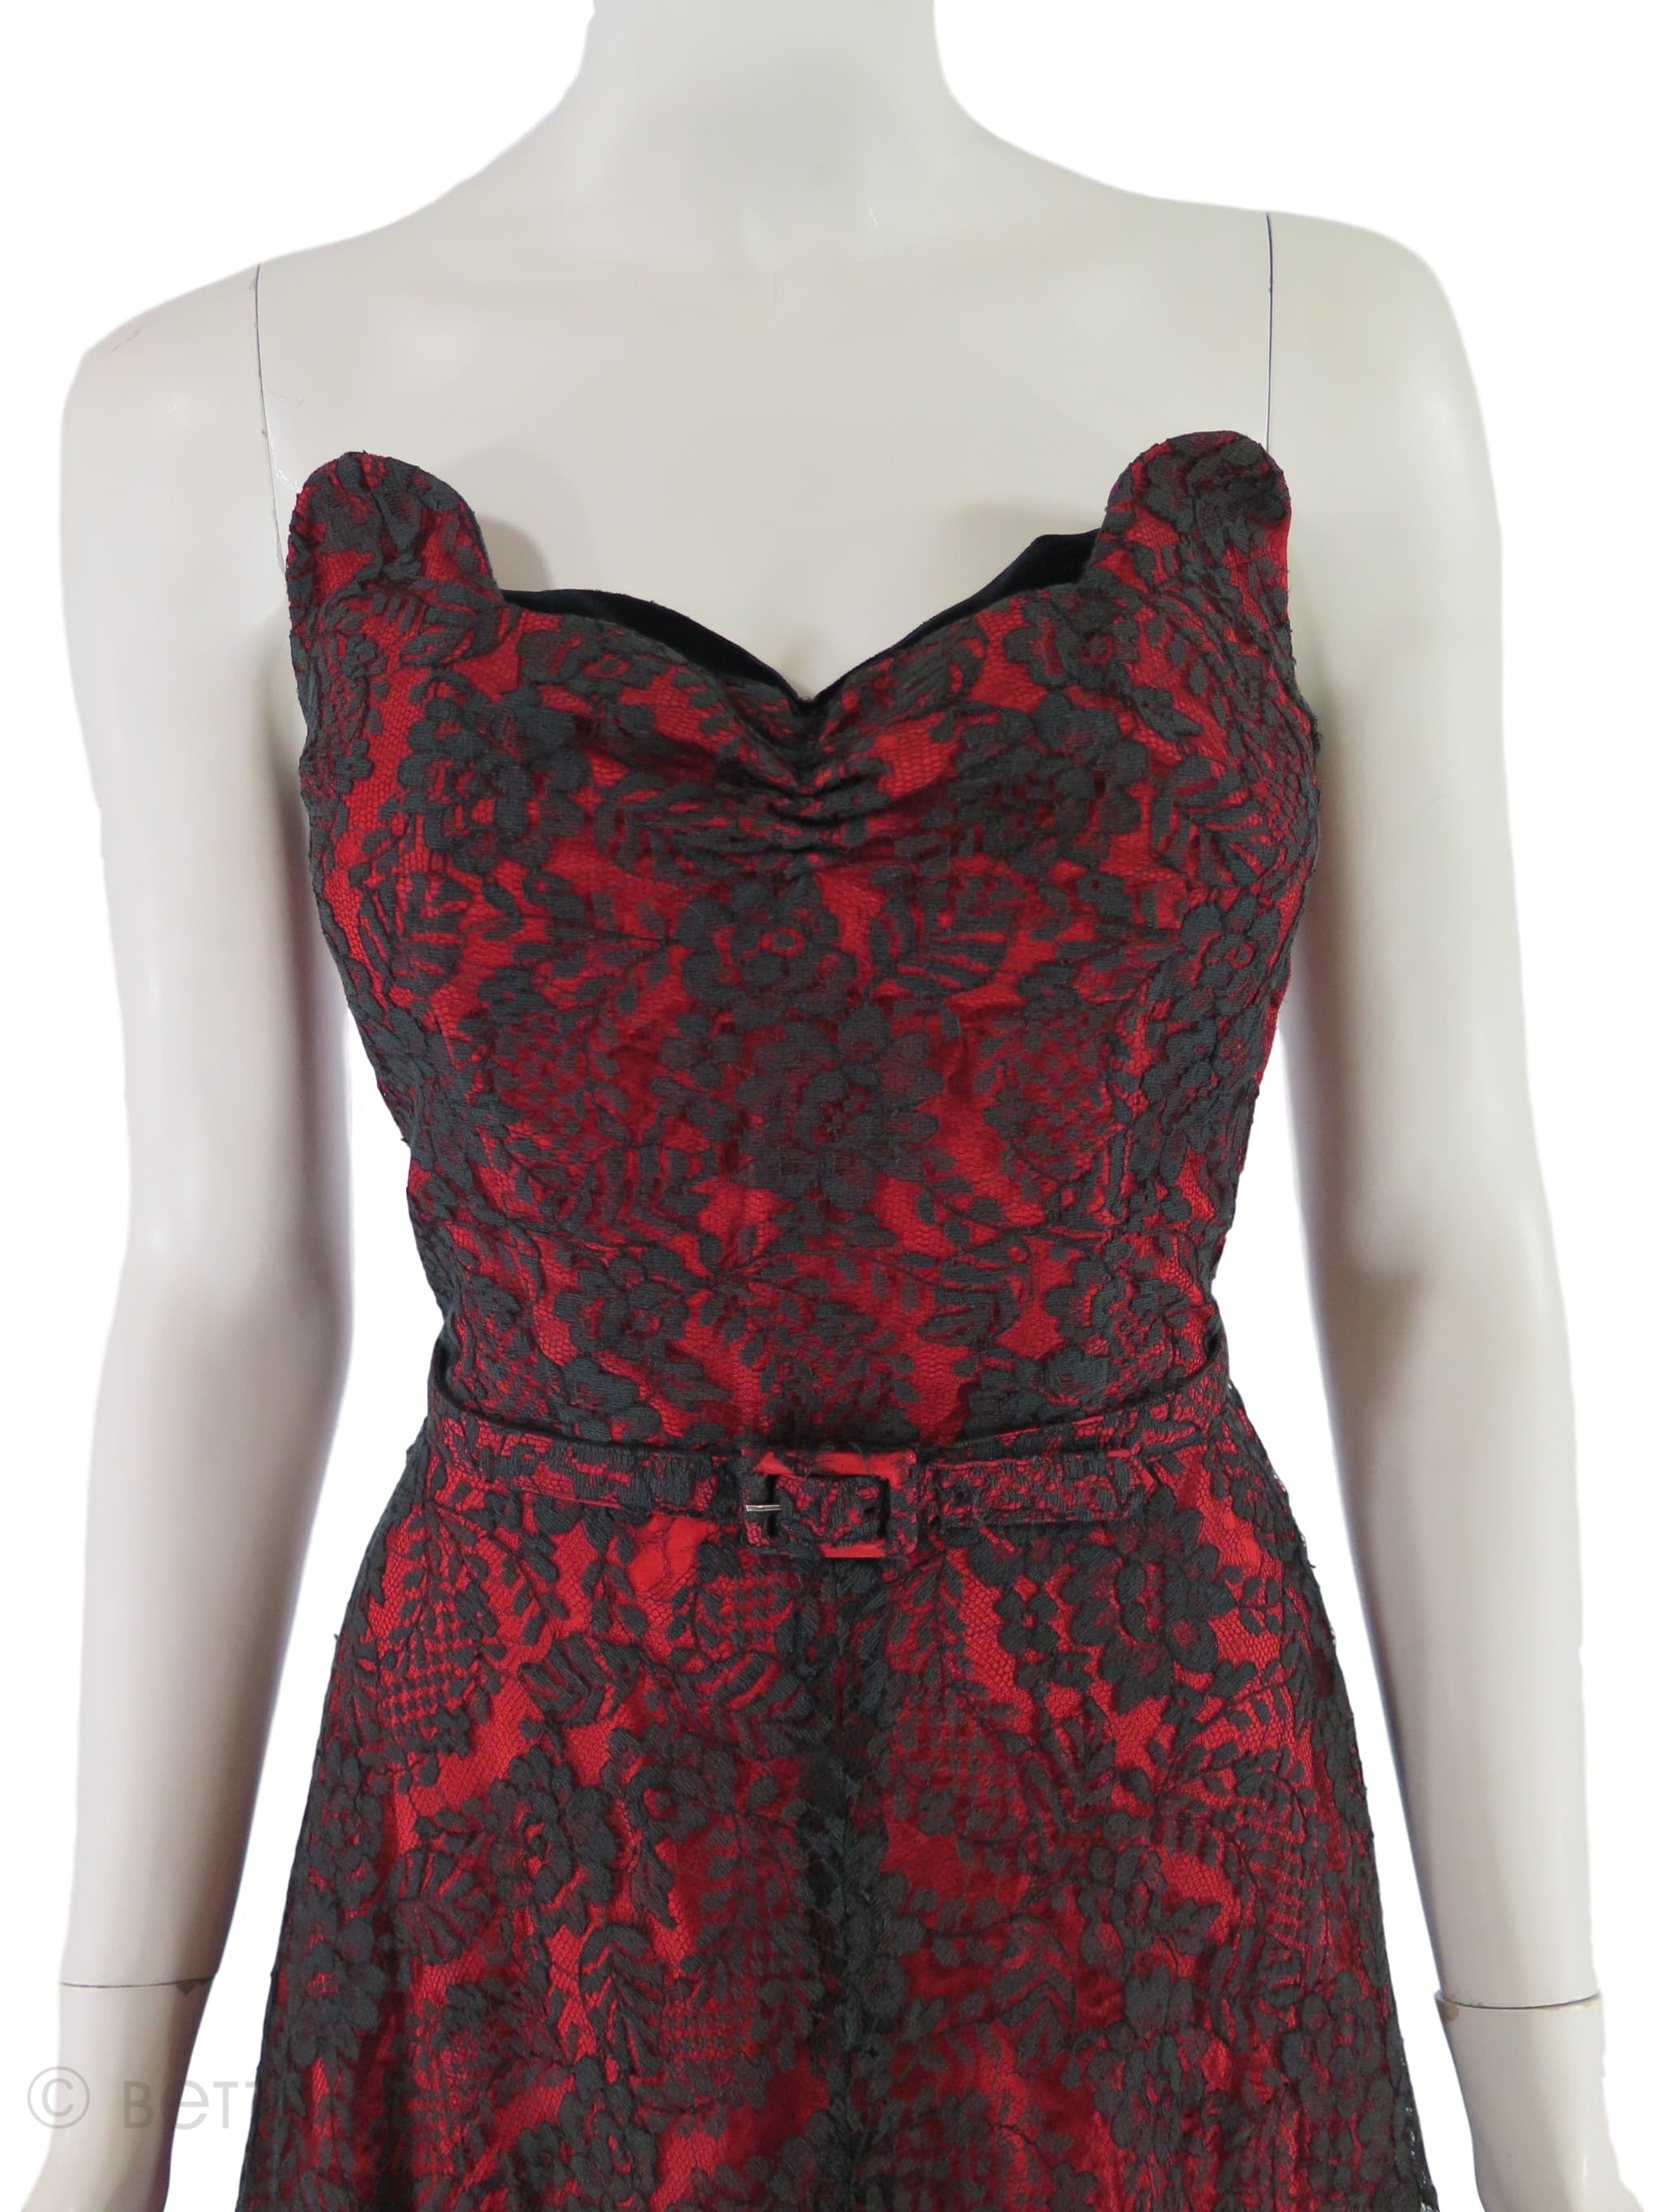 40s/50s New Look Strapless Dress + Bolero in Black Lace on Red - sm ...